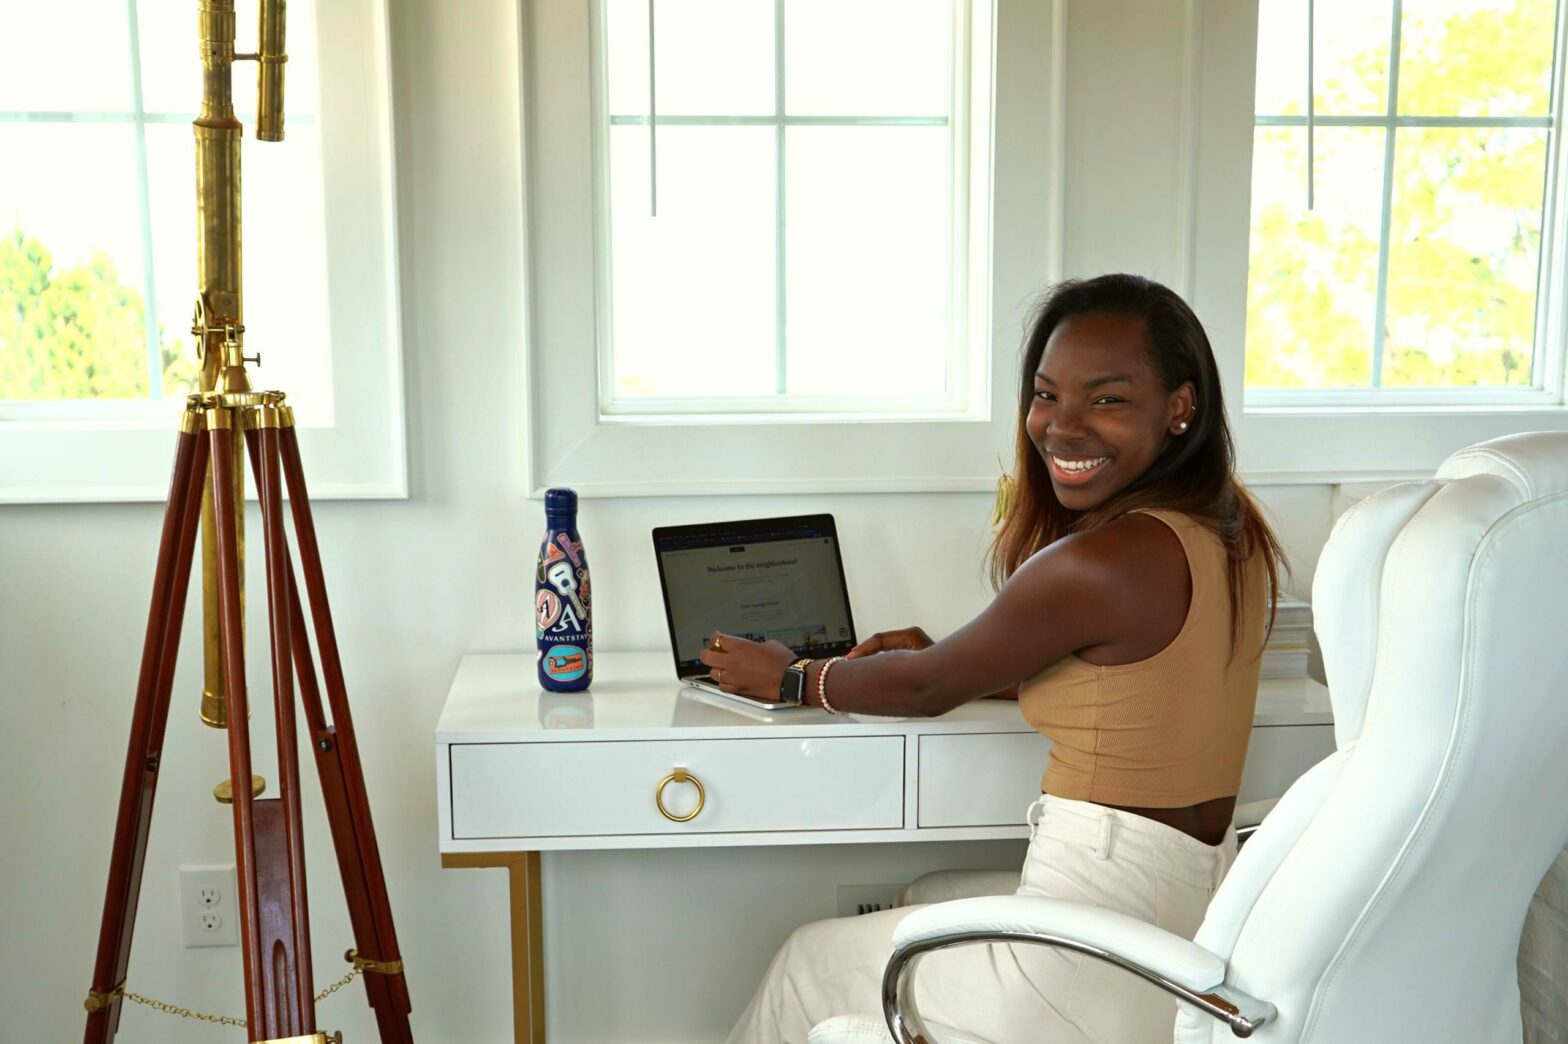 a woman sits at a desk with a laptop open as she looks towards the camera and smiles